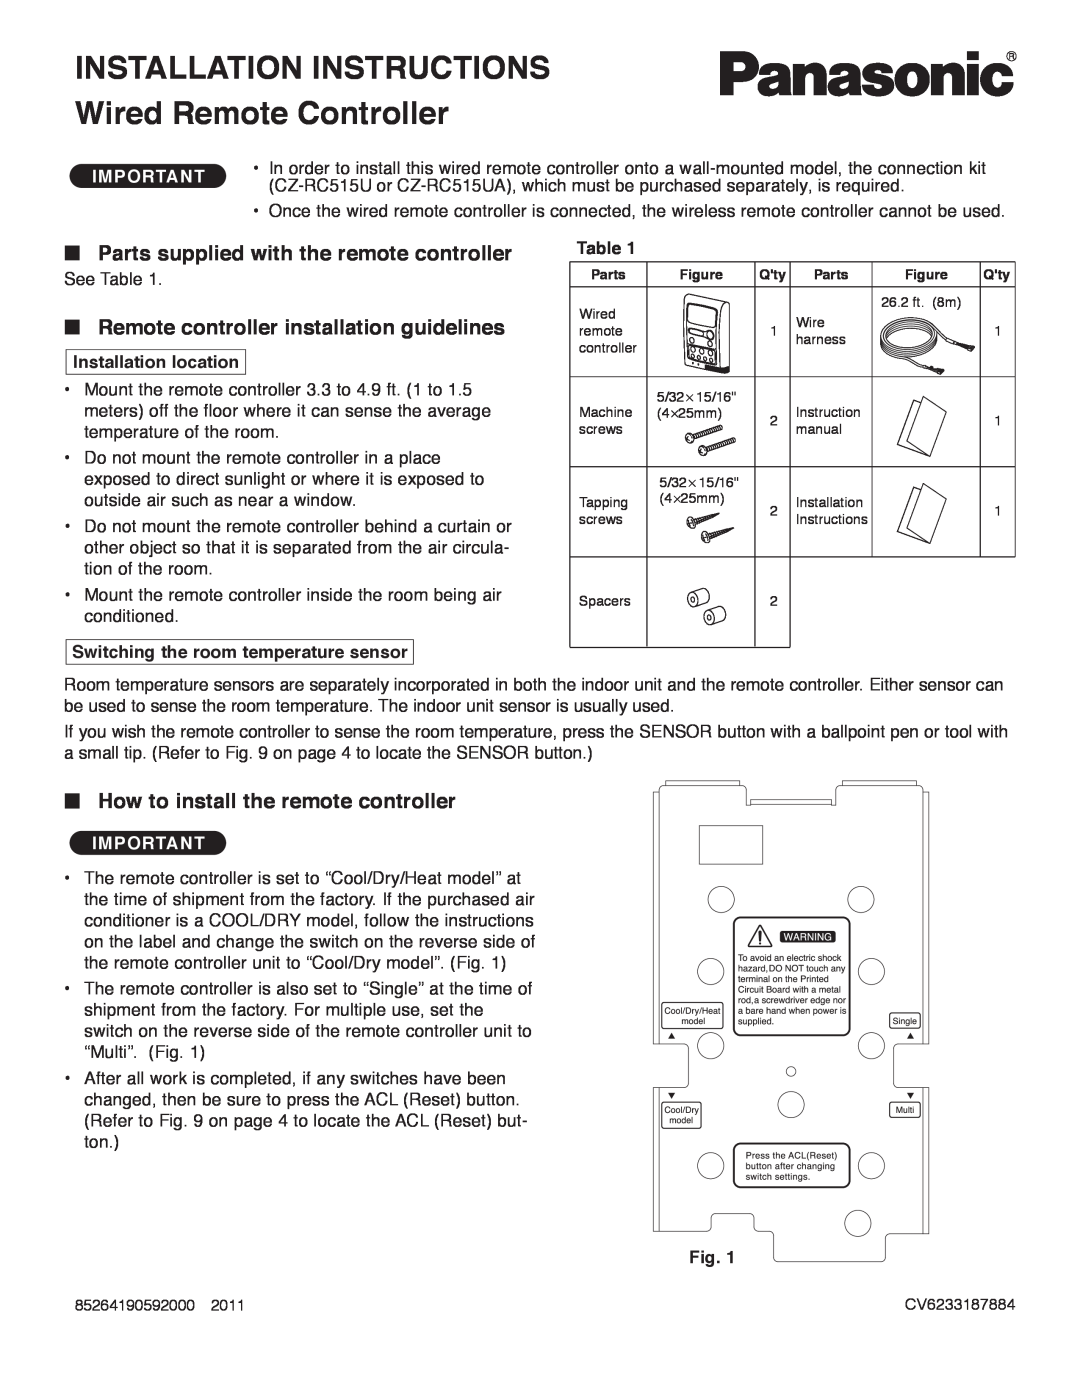 Panasonic R410A INSTALLATION INSTRUCTIONS Wired Remote Controller, Parts supplied with the remote controller, Table, Fig 